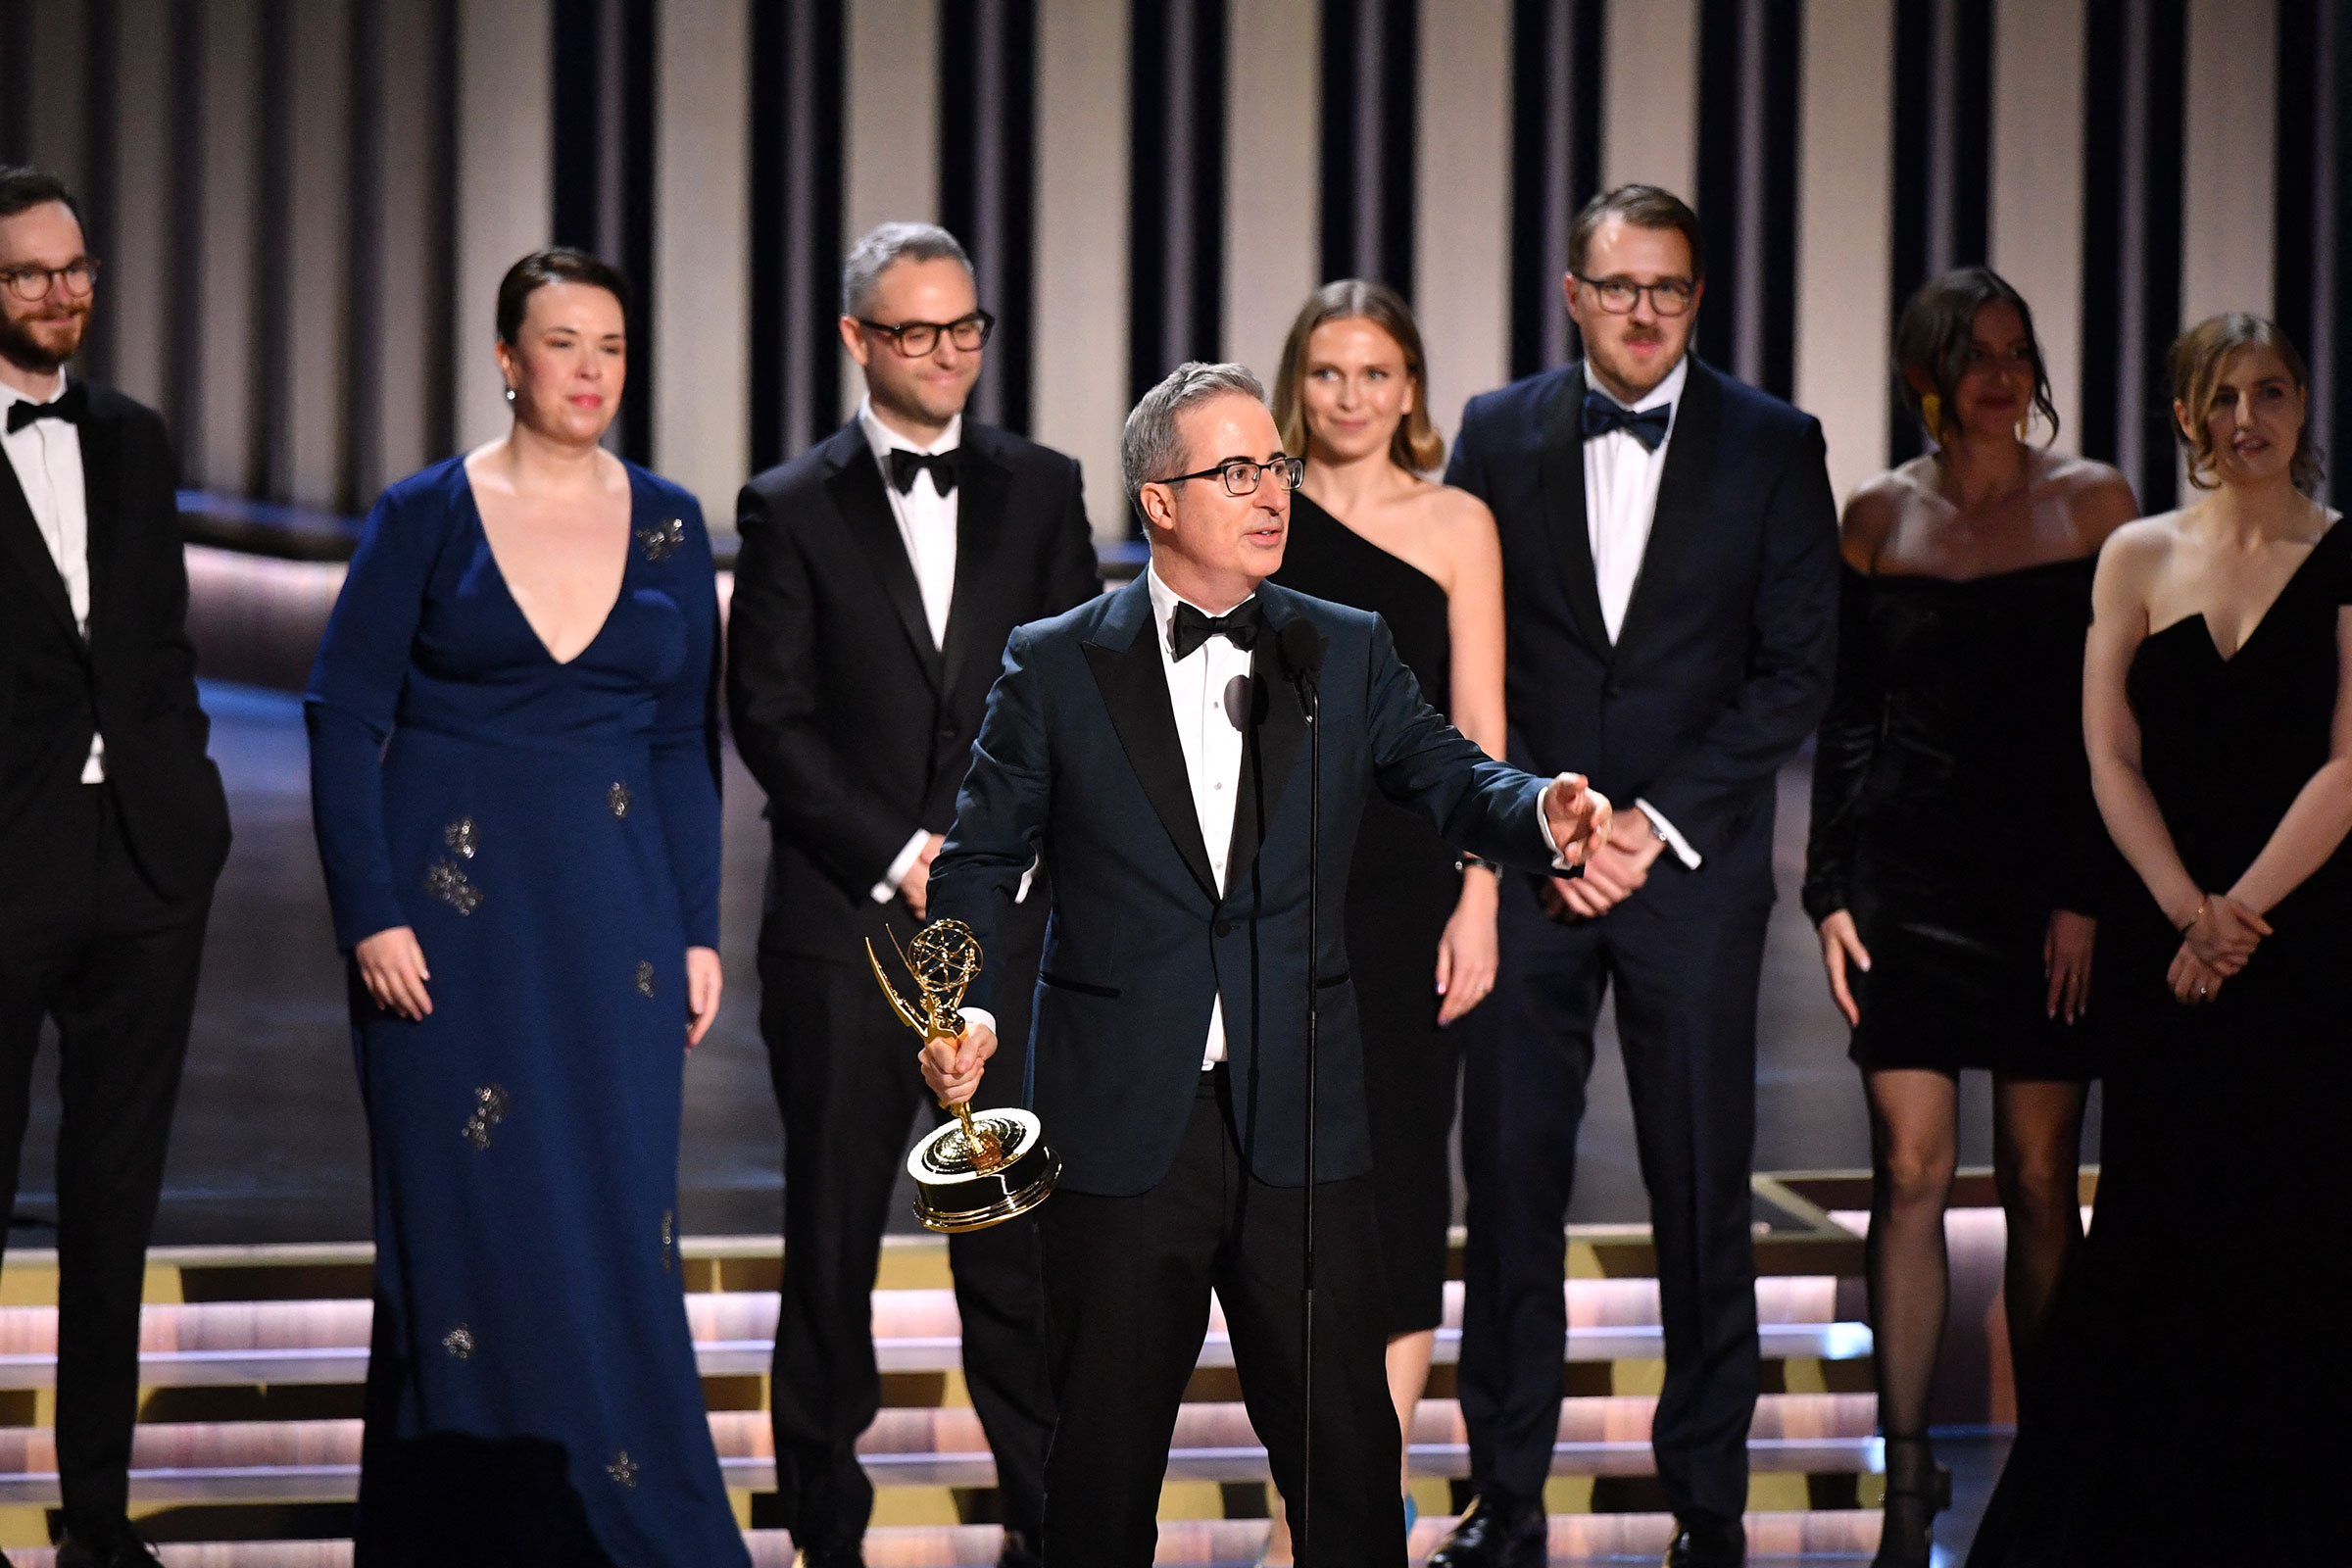 John Oliver, winner of Outstanding Scripted Variety Series with "Last Week Tonight with John Oliver" speaks onstage during the 75th Emmy Awards.